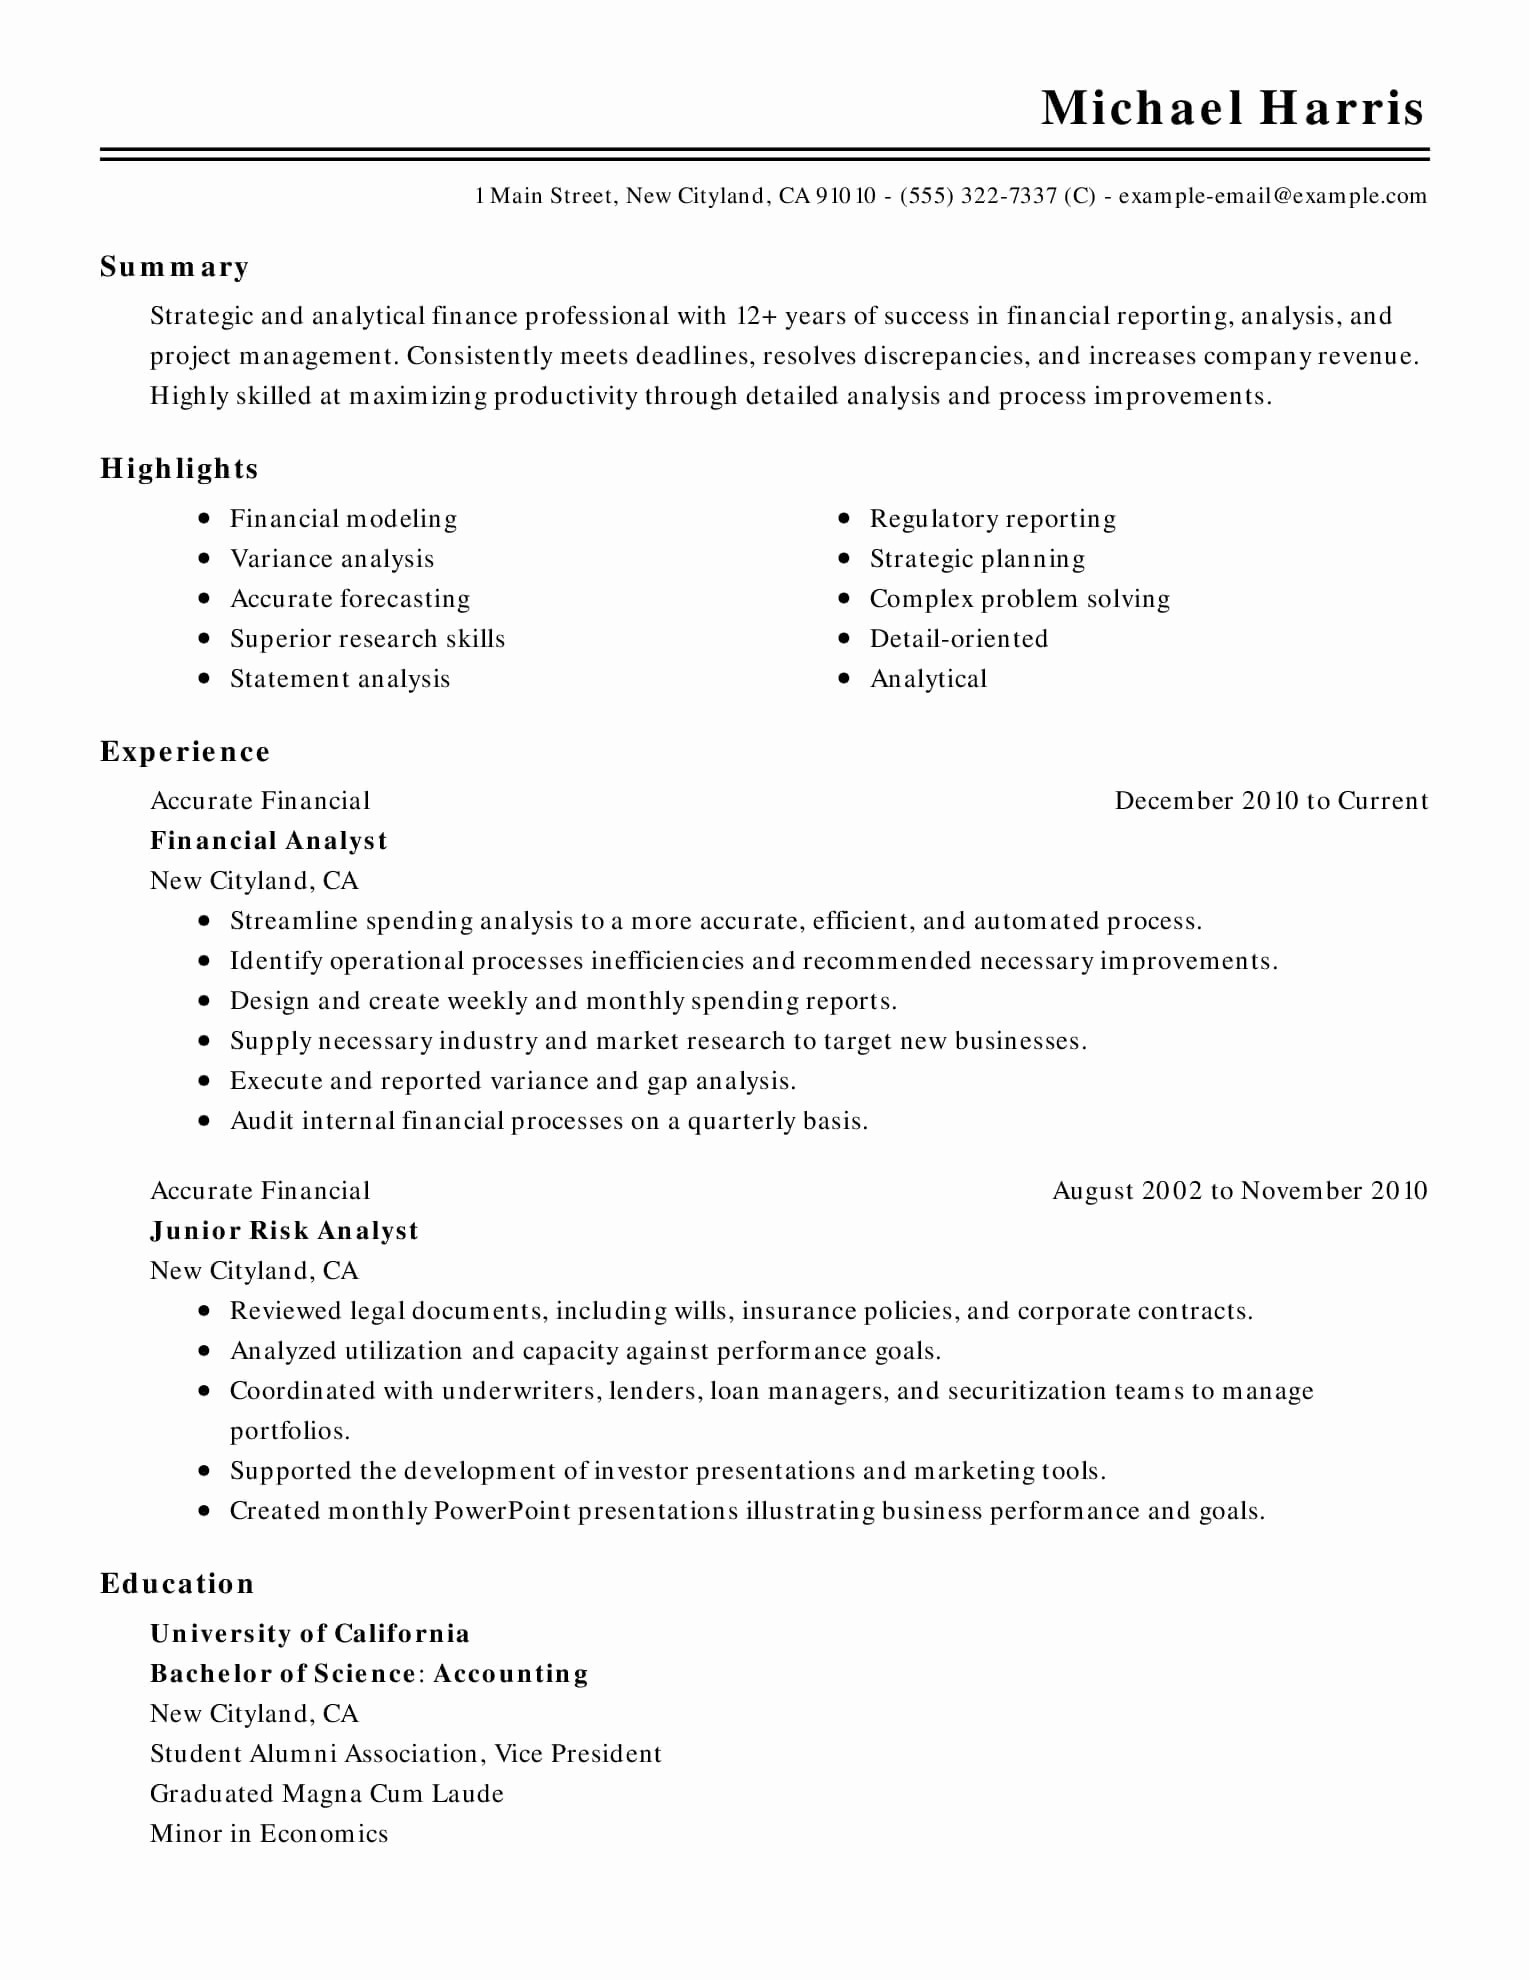 Microsoft Word Template for Resume Lovely 15 Of the Best Resume Templates for Microsoft Word Fice